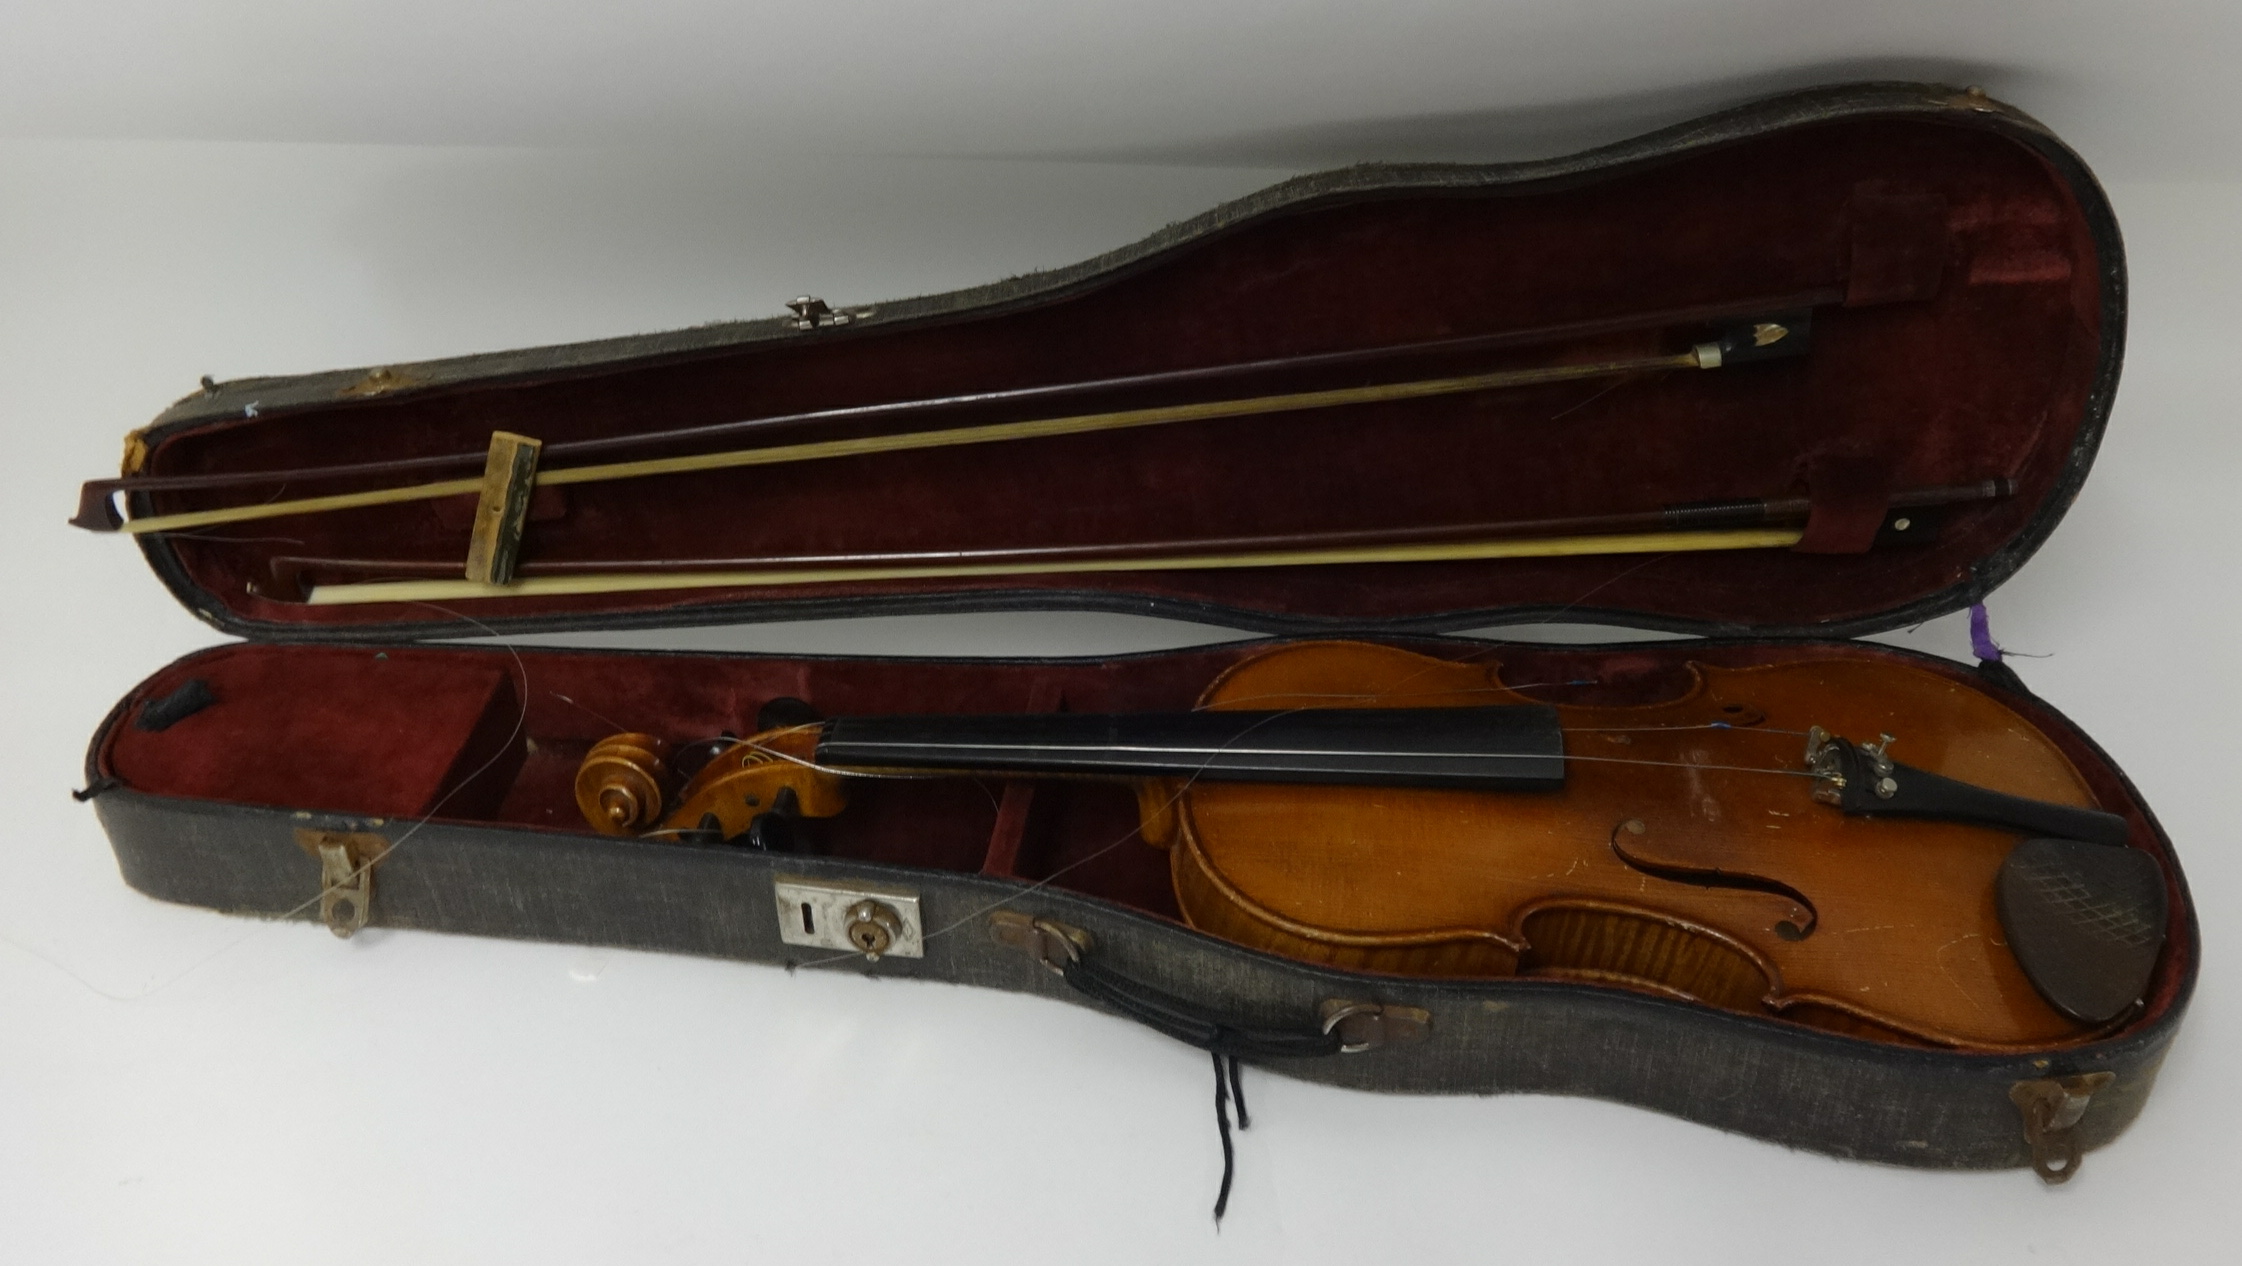 An old violin and two bows, cased.